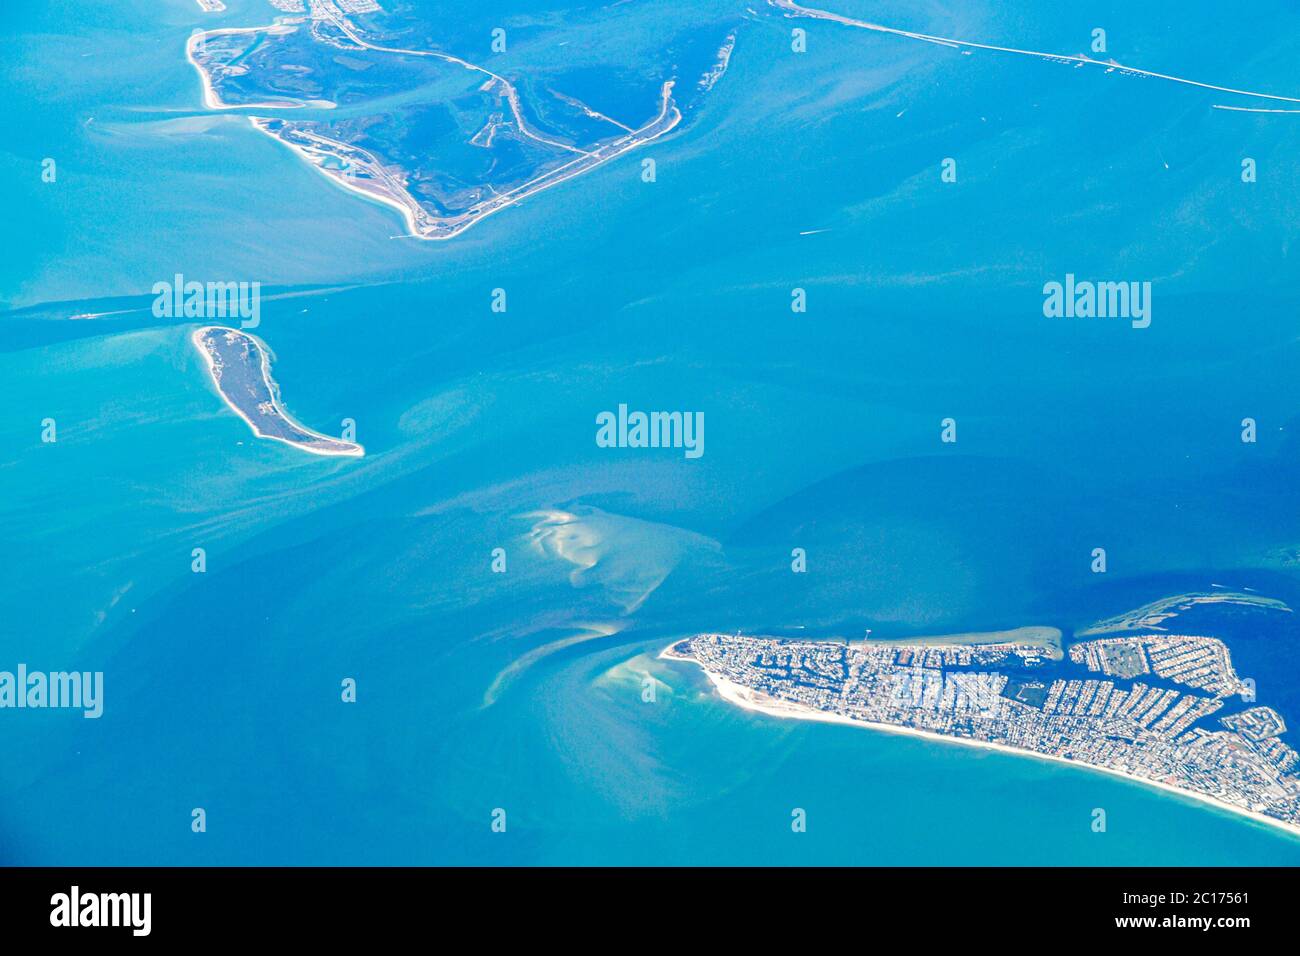 Florida,Tampa Bay,Sunshine Skyway Bridge,Anna Maria Island,Gulf of Mexico Coast,aerial overhead view from above,American Airlines Miami to New Orleans Stock Photo